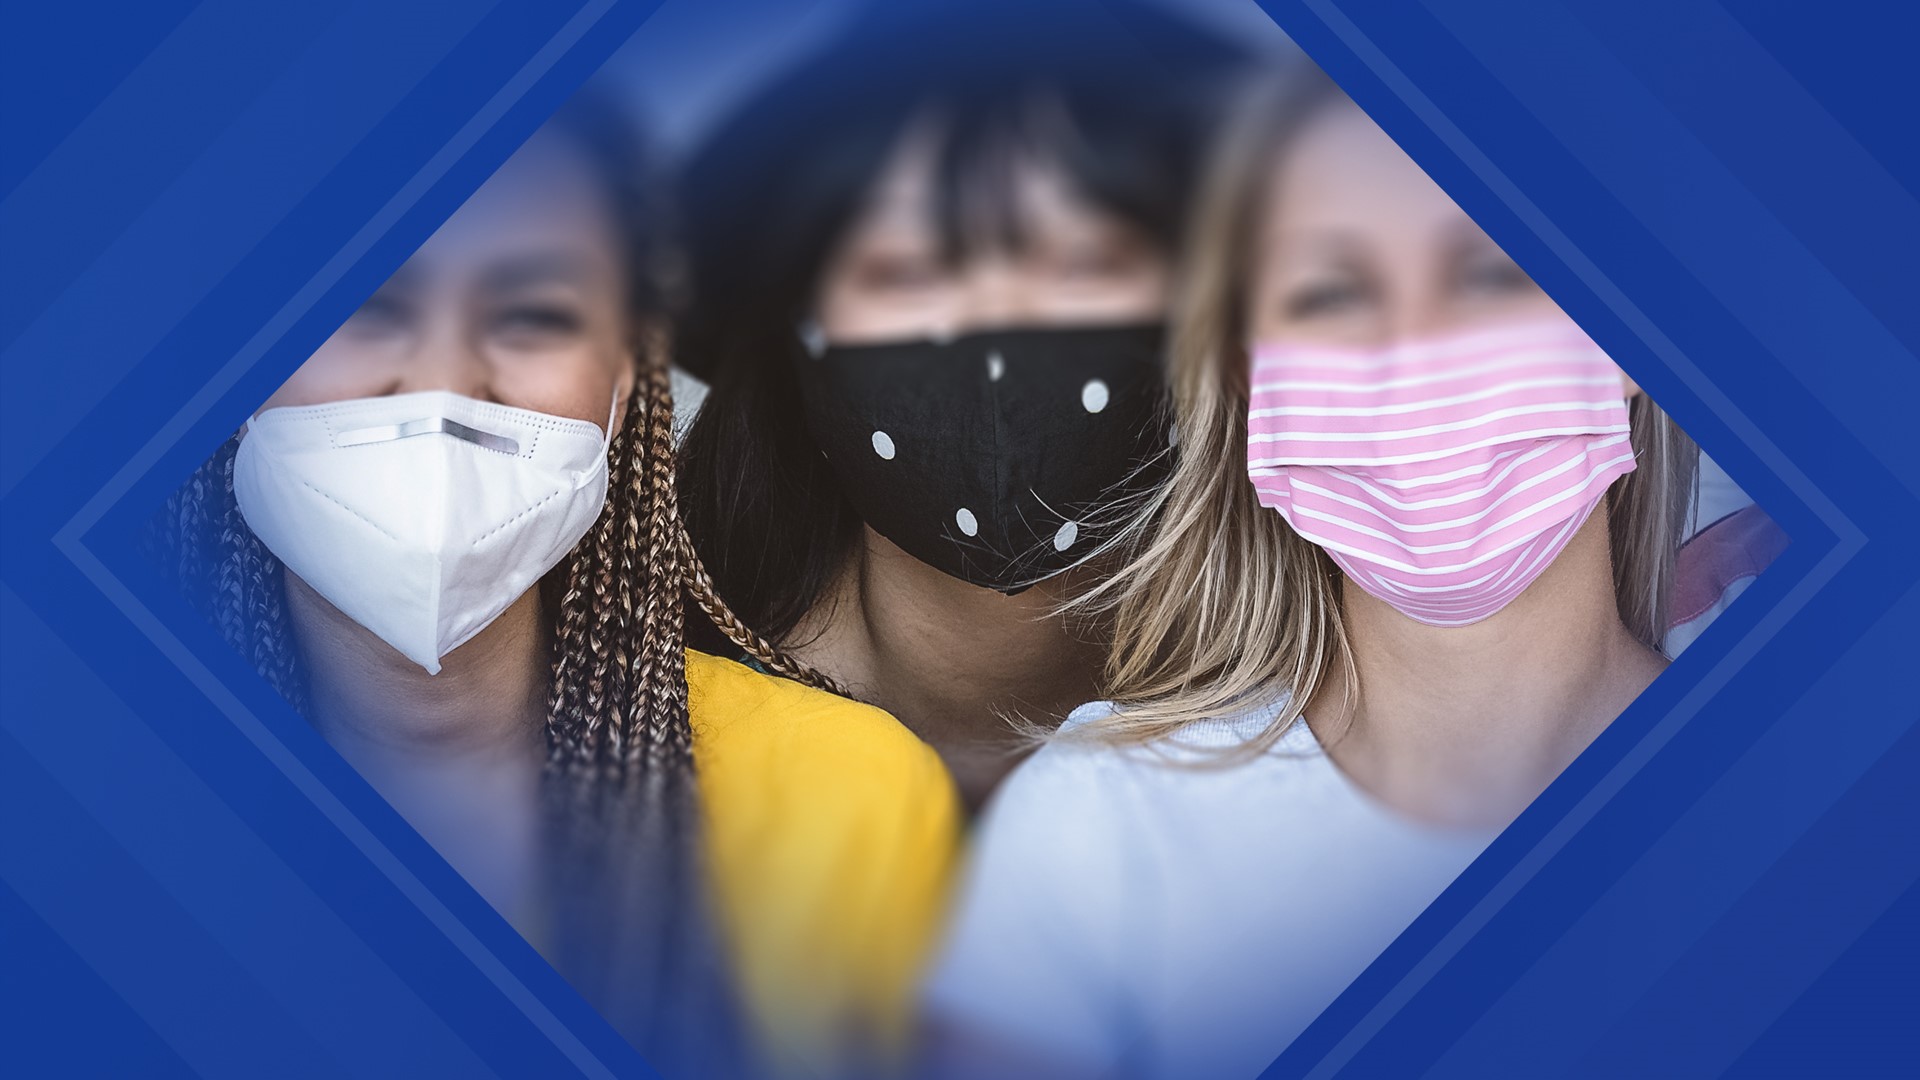 University officials reimposed mask requirements based on levels of COVID-19 community spread.